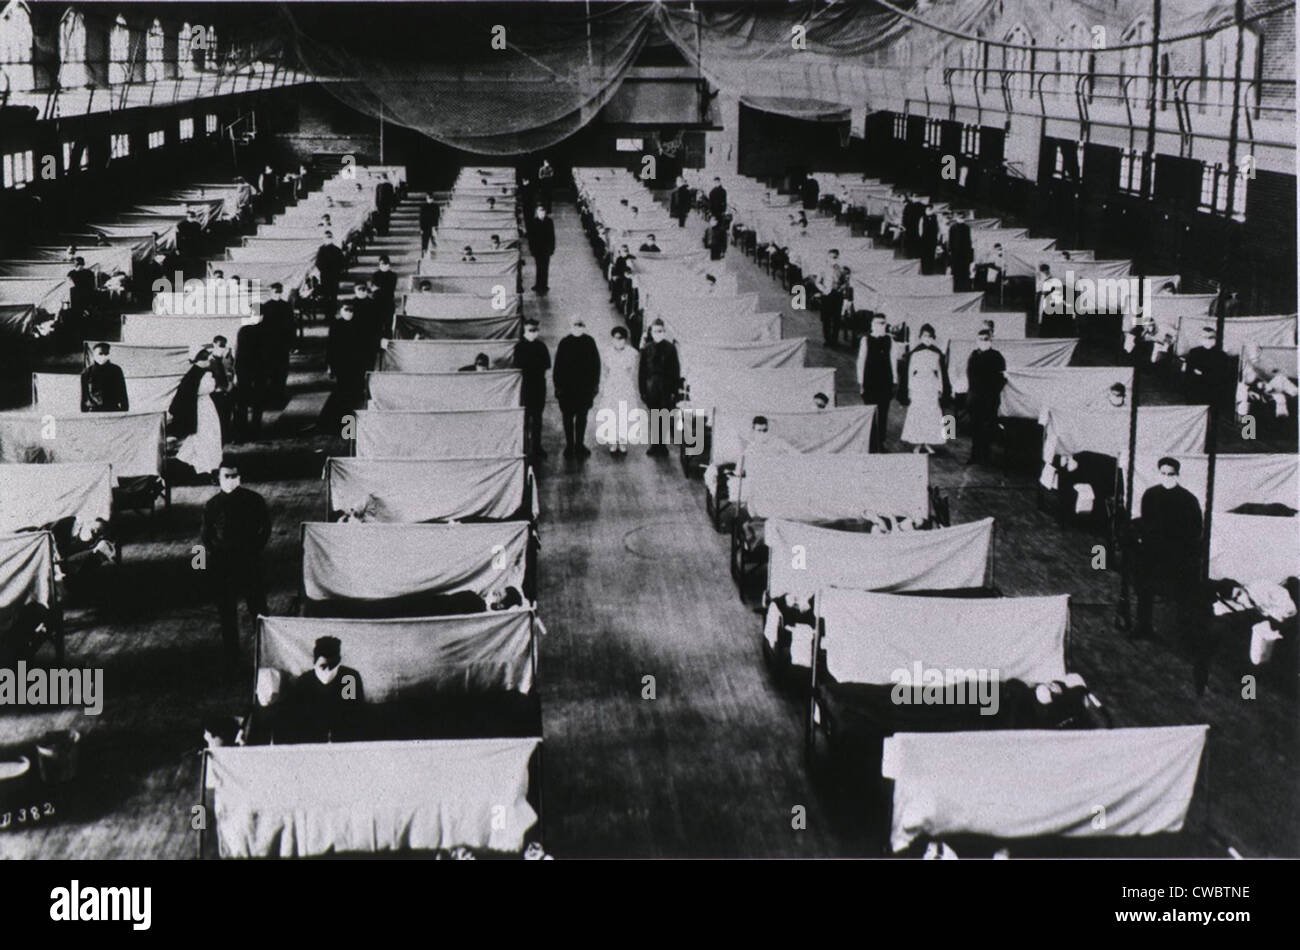 Spanish Flu Epidemic 1918-19. U.S. school gymnasium converted into an flu ward with patients' beds are separated by screens and Stock Photo